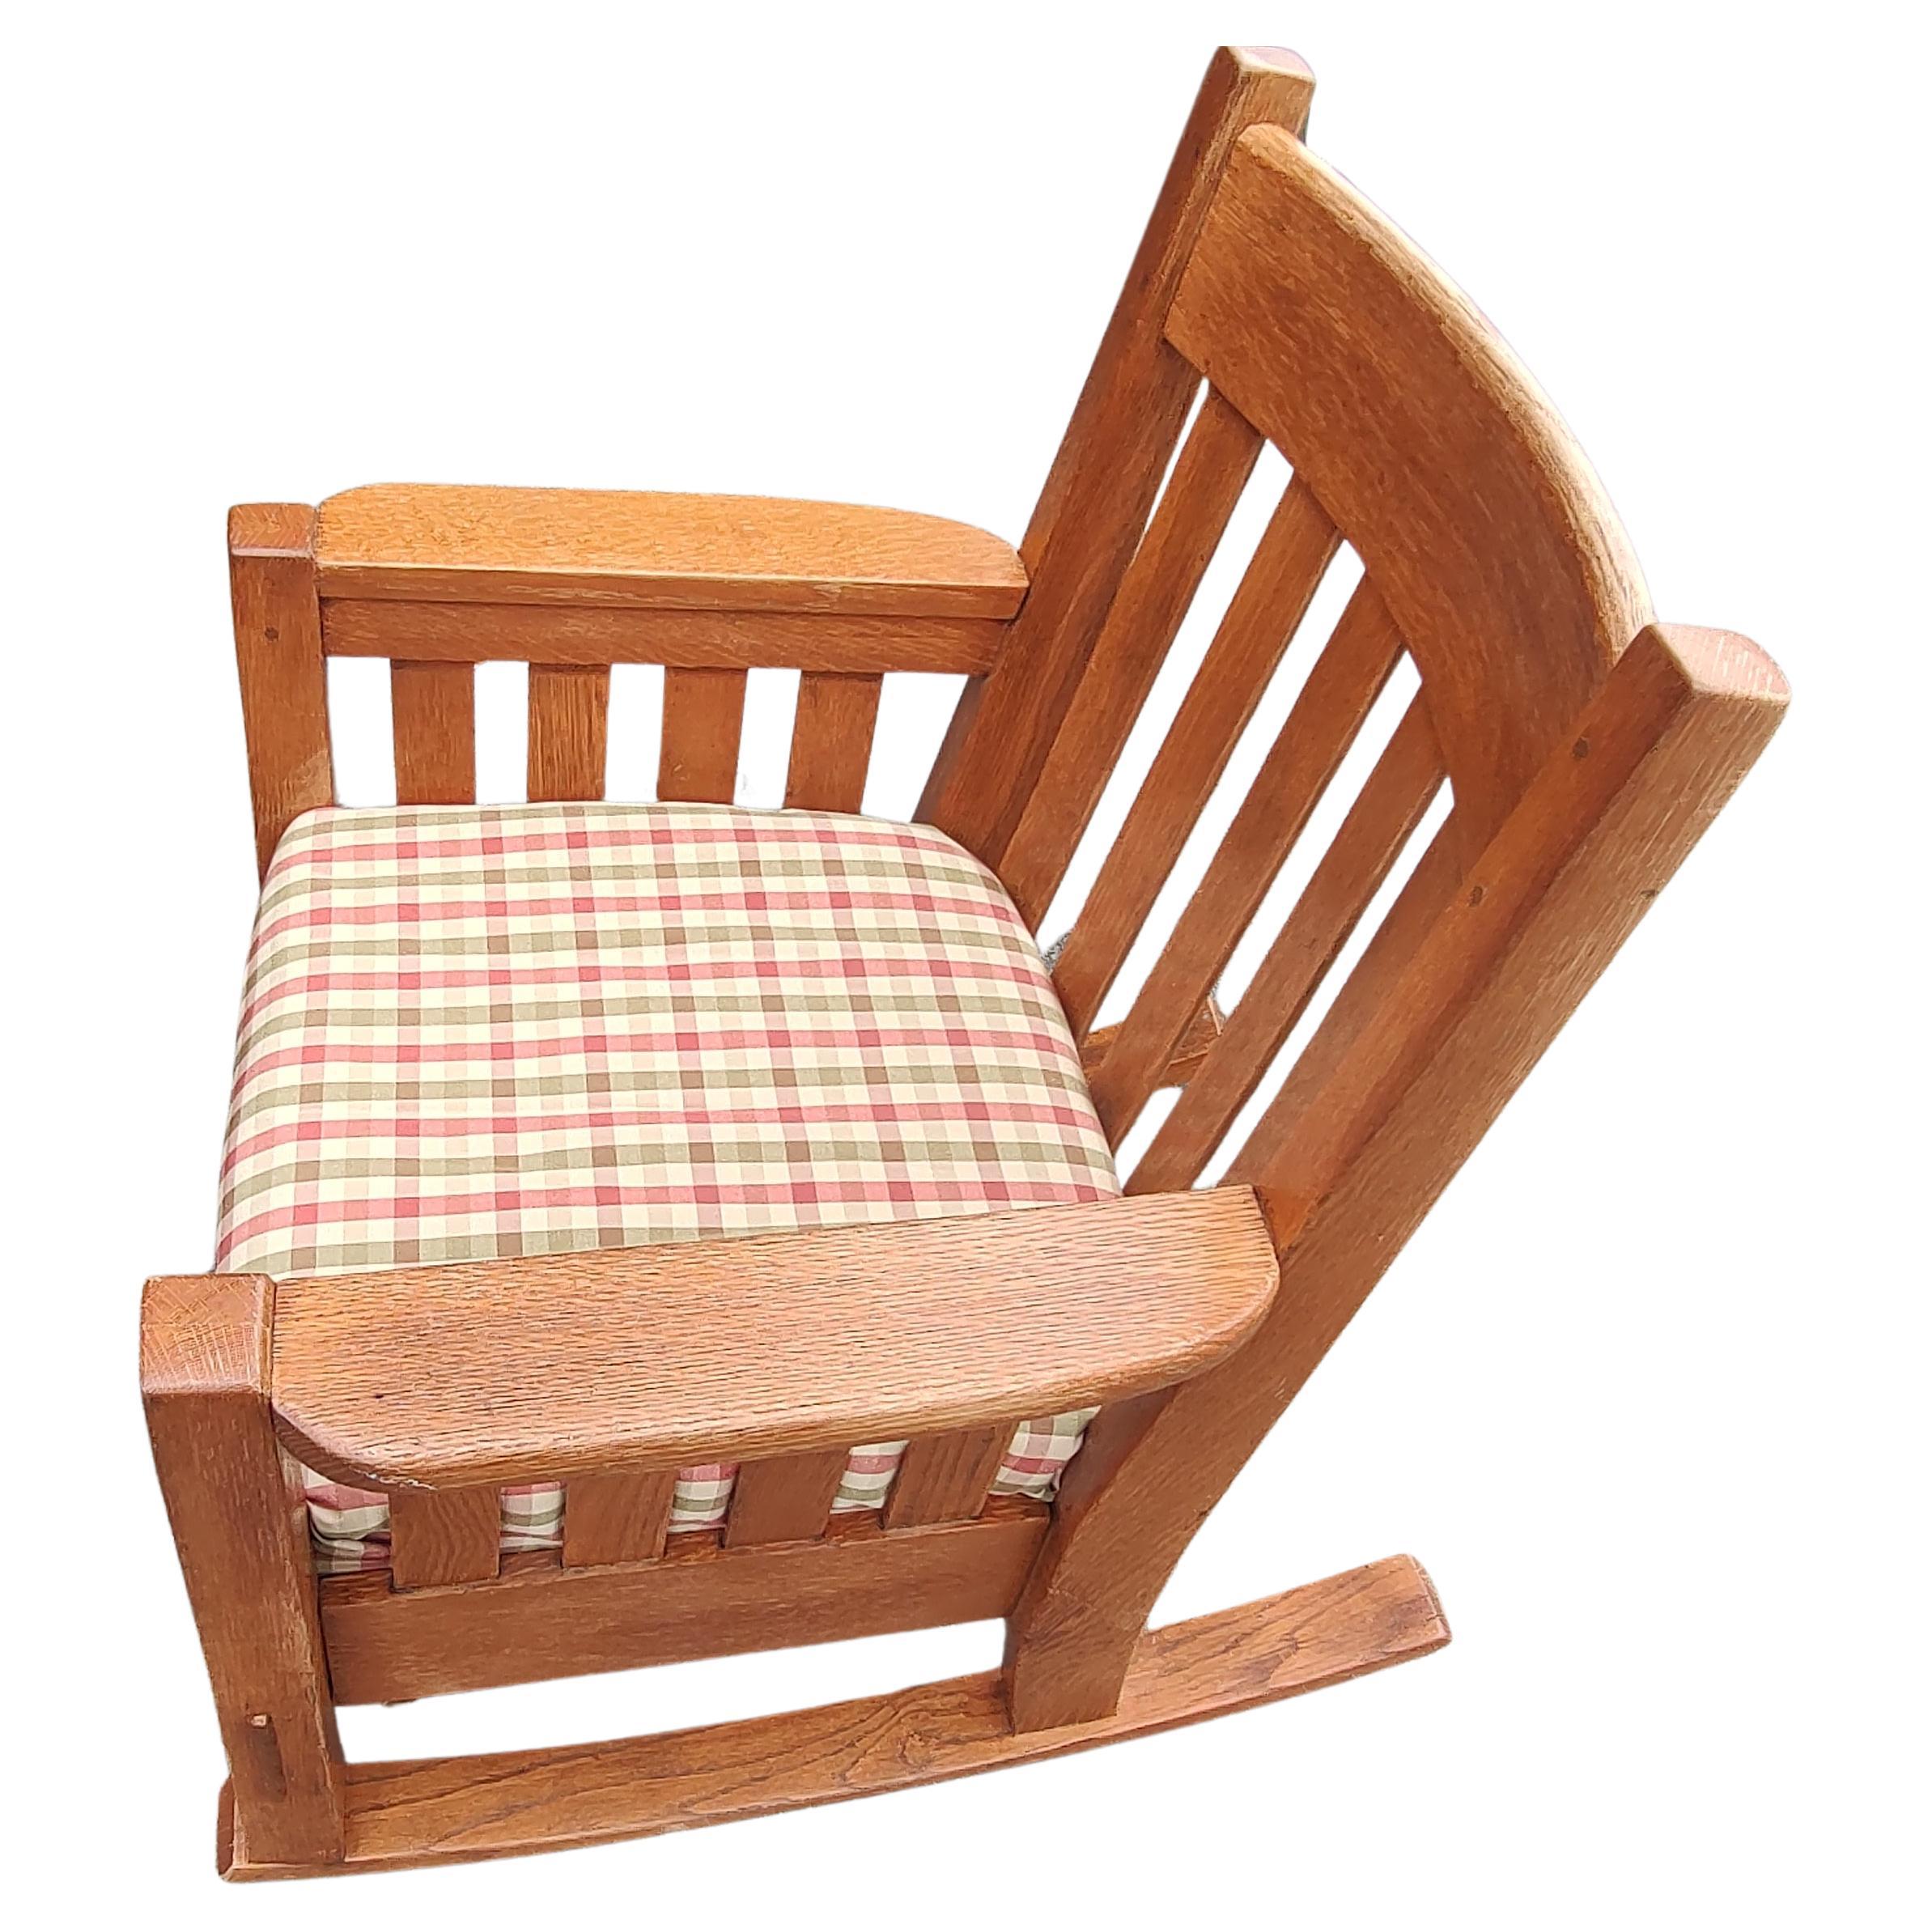 Early 20th Century Arts & Crafts Mission Oak Slatted Rocking Chair by Harden C1910 For Sale